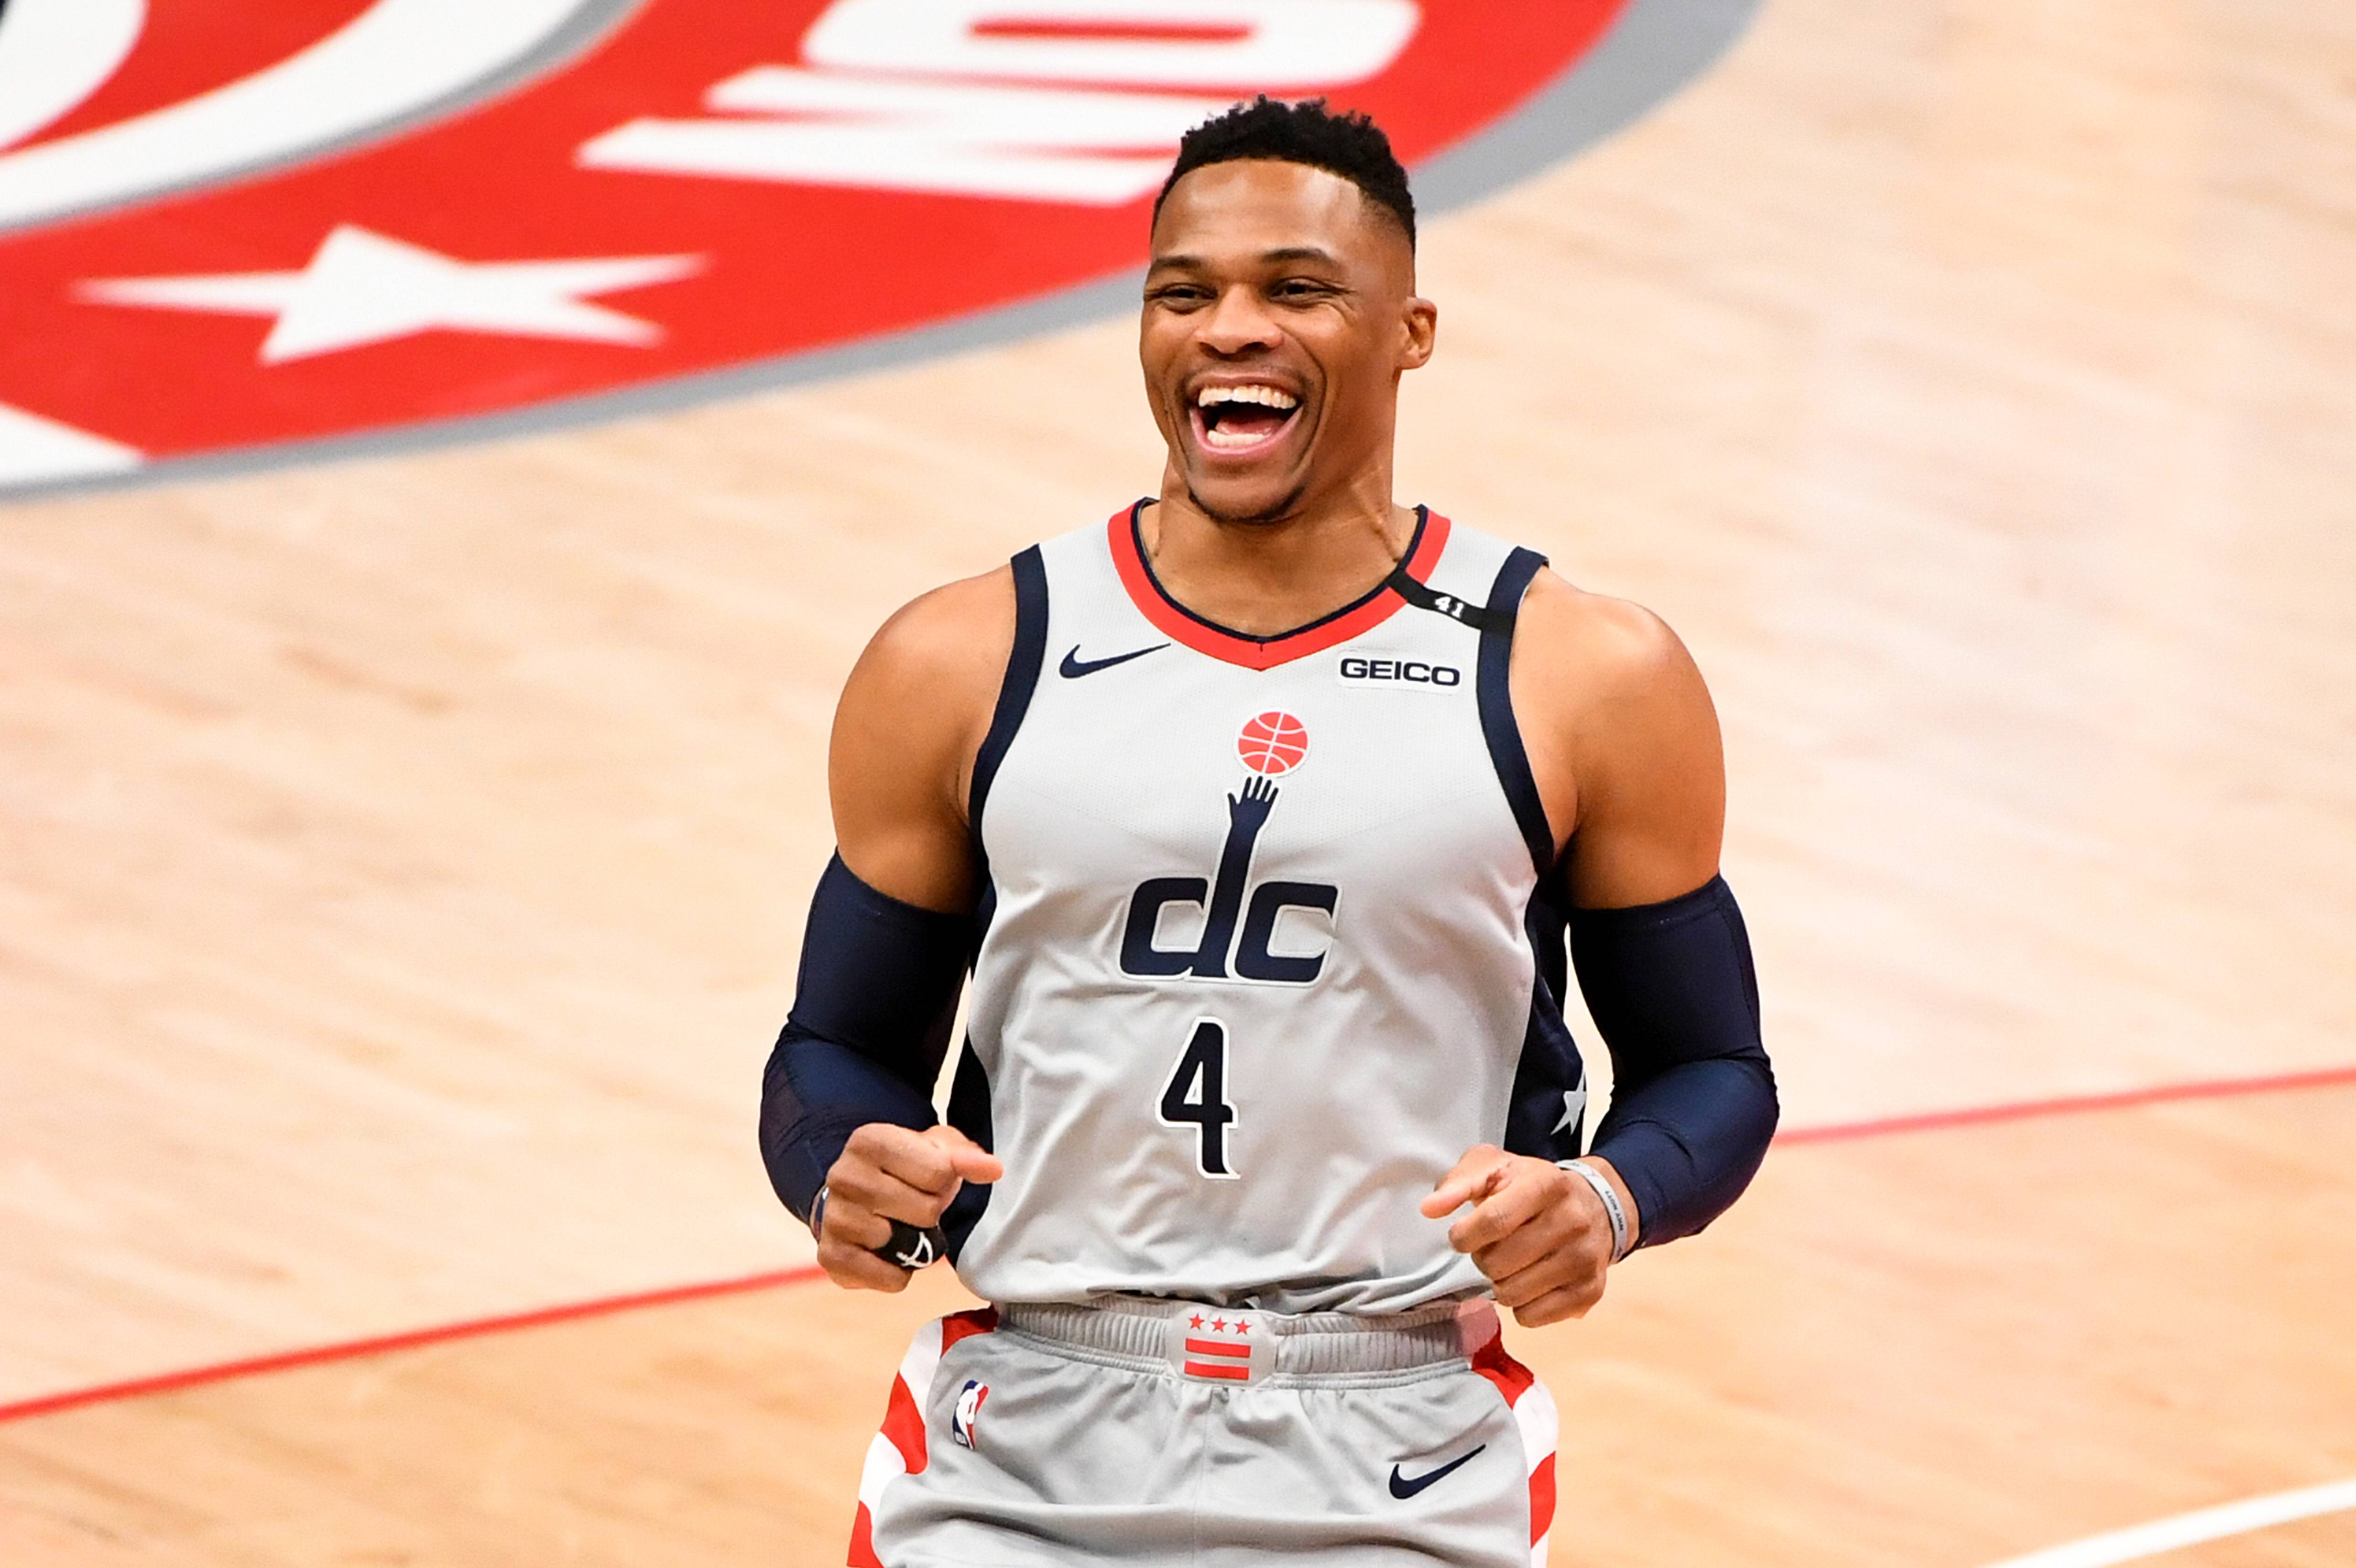 Reports: Lakers agree to Russell Westbrook trade